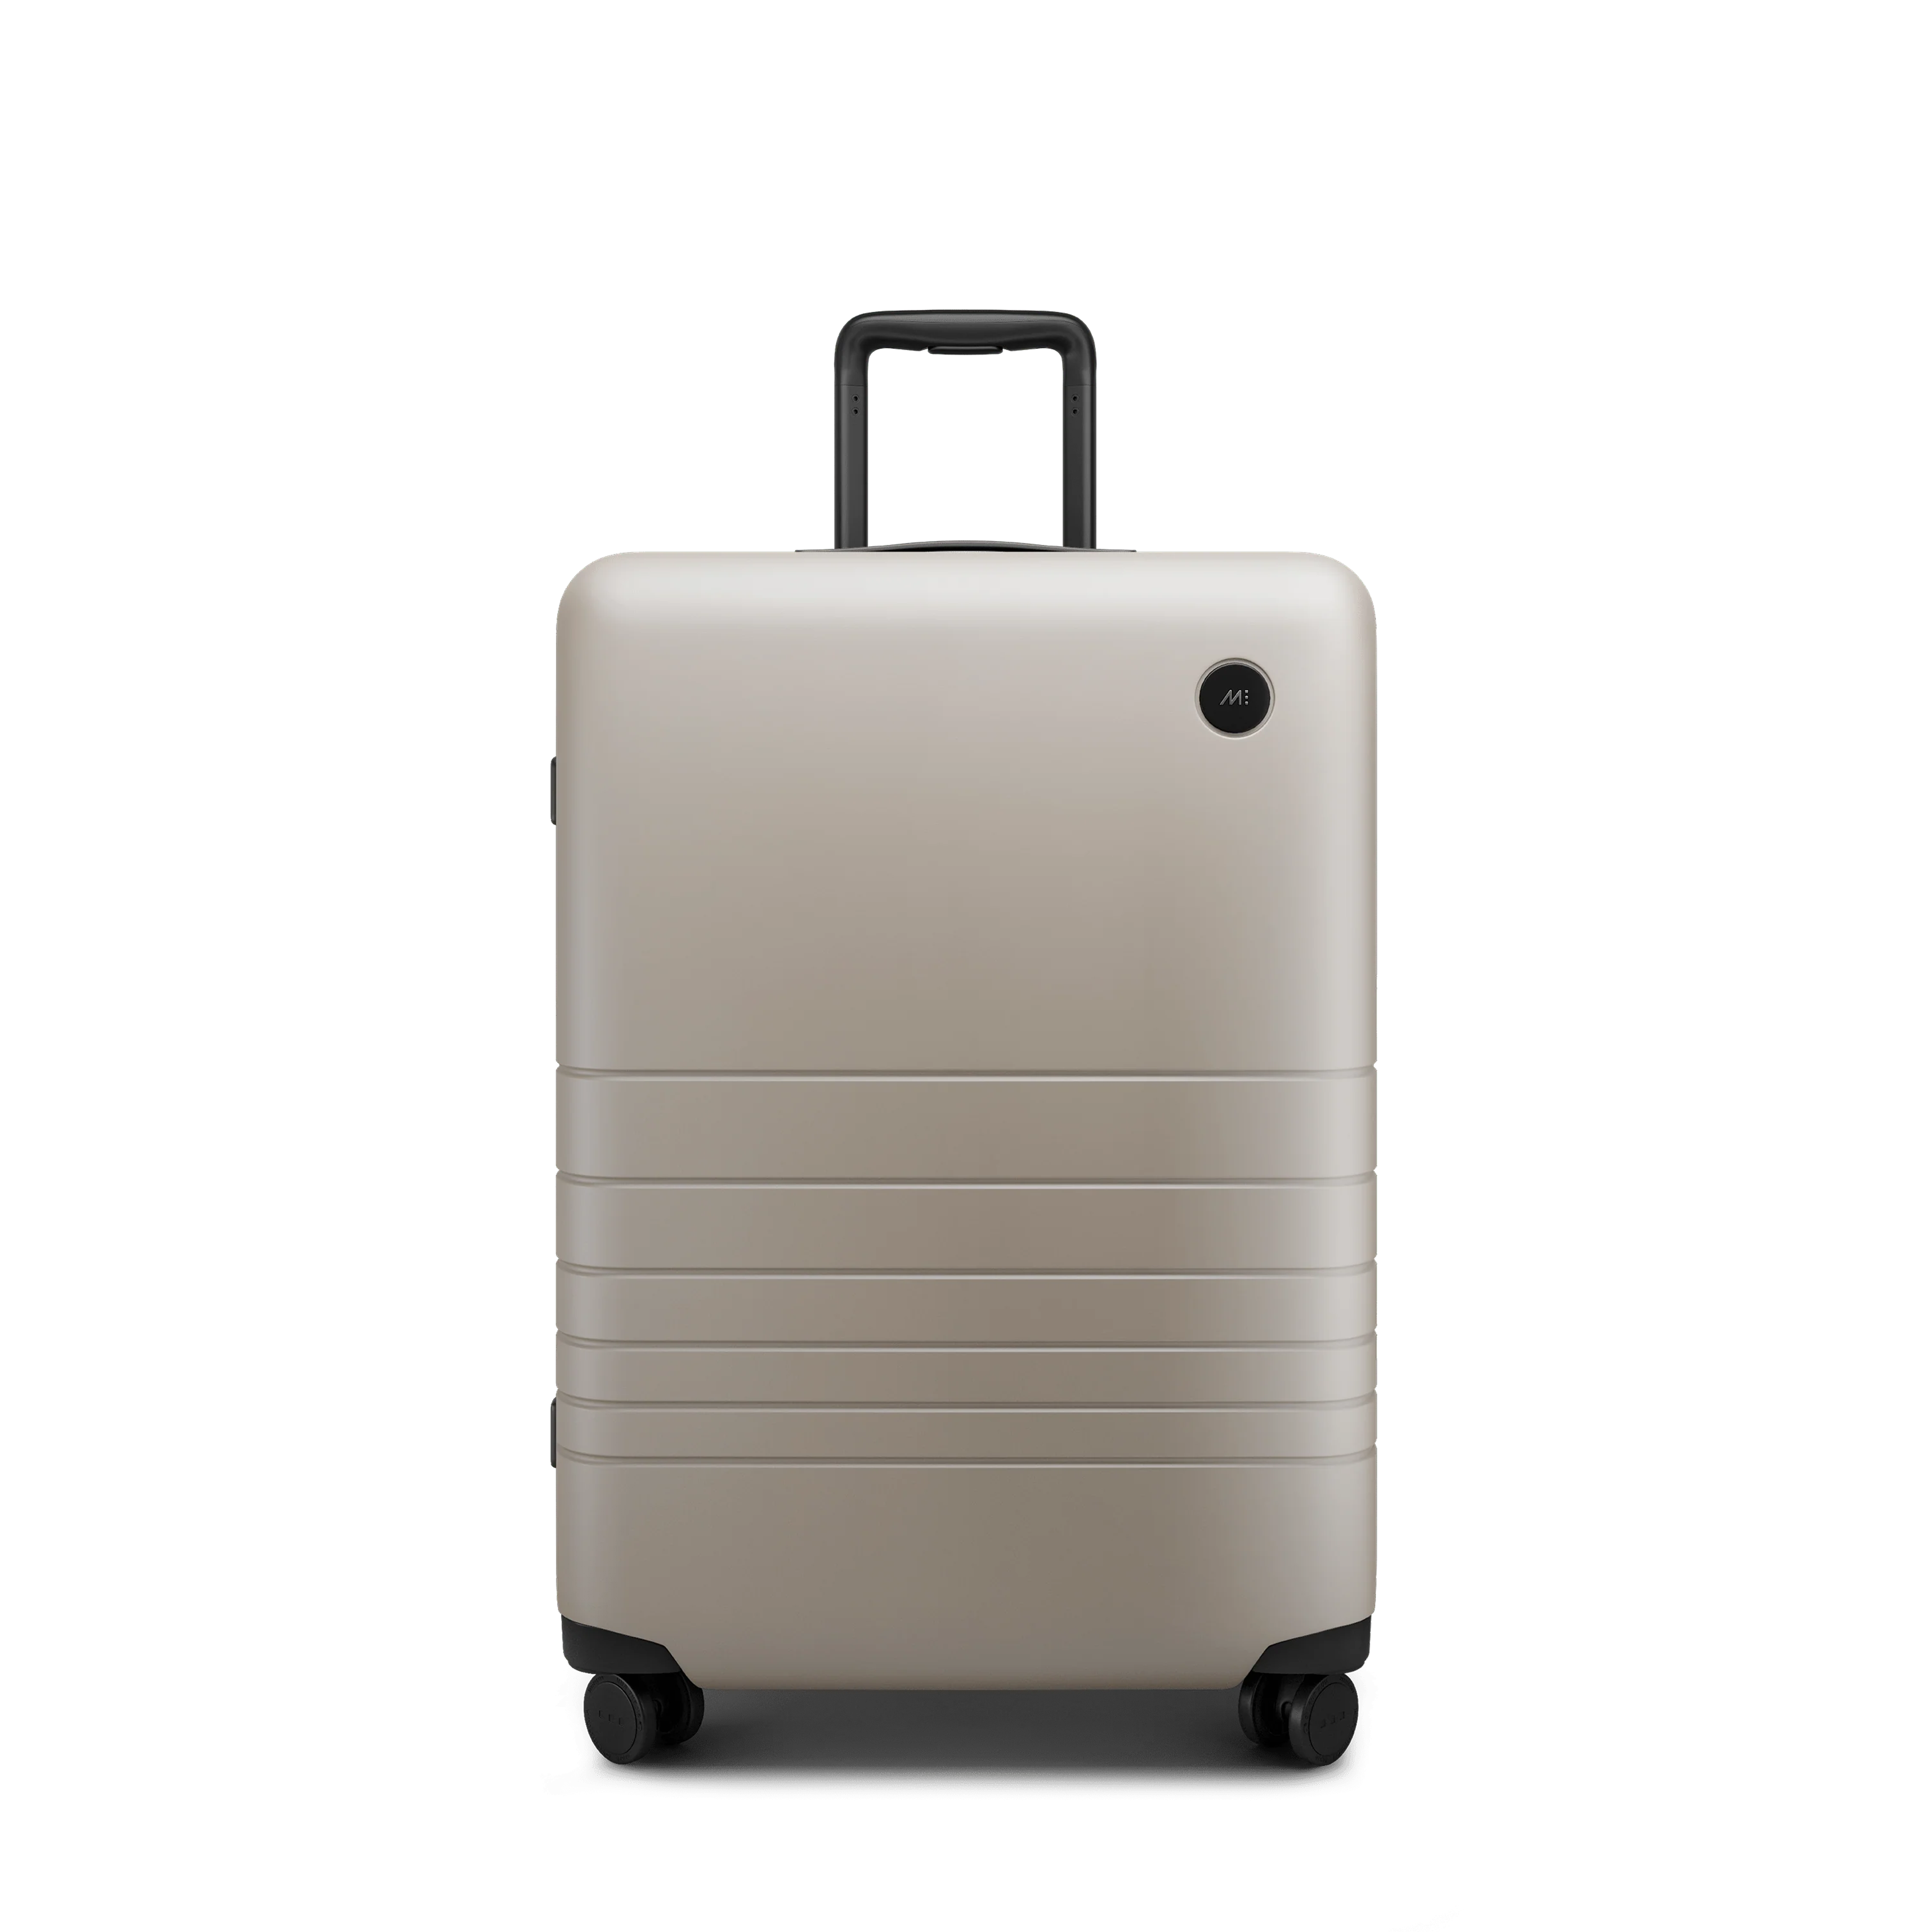 Best 26" Check-In Suitcases | Monos Travel Luggage & Accessories